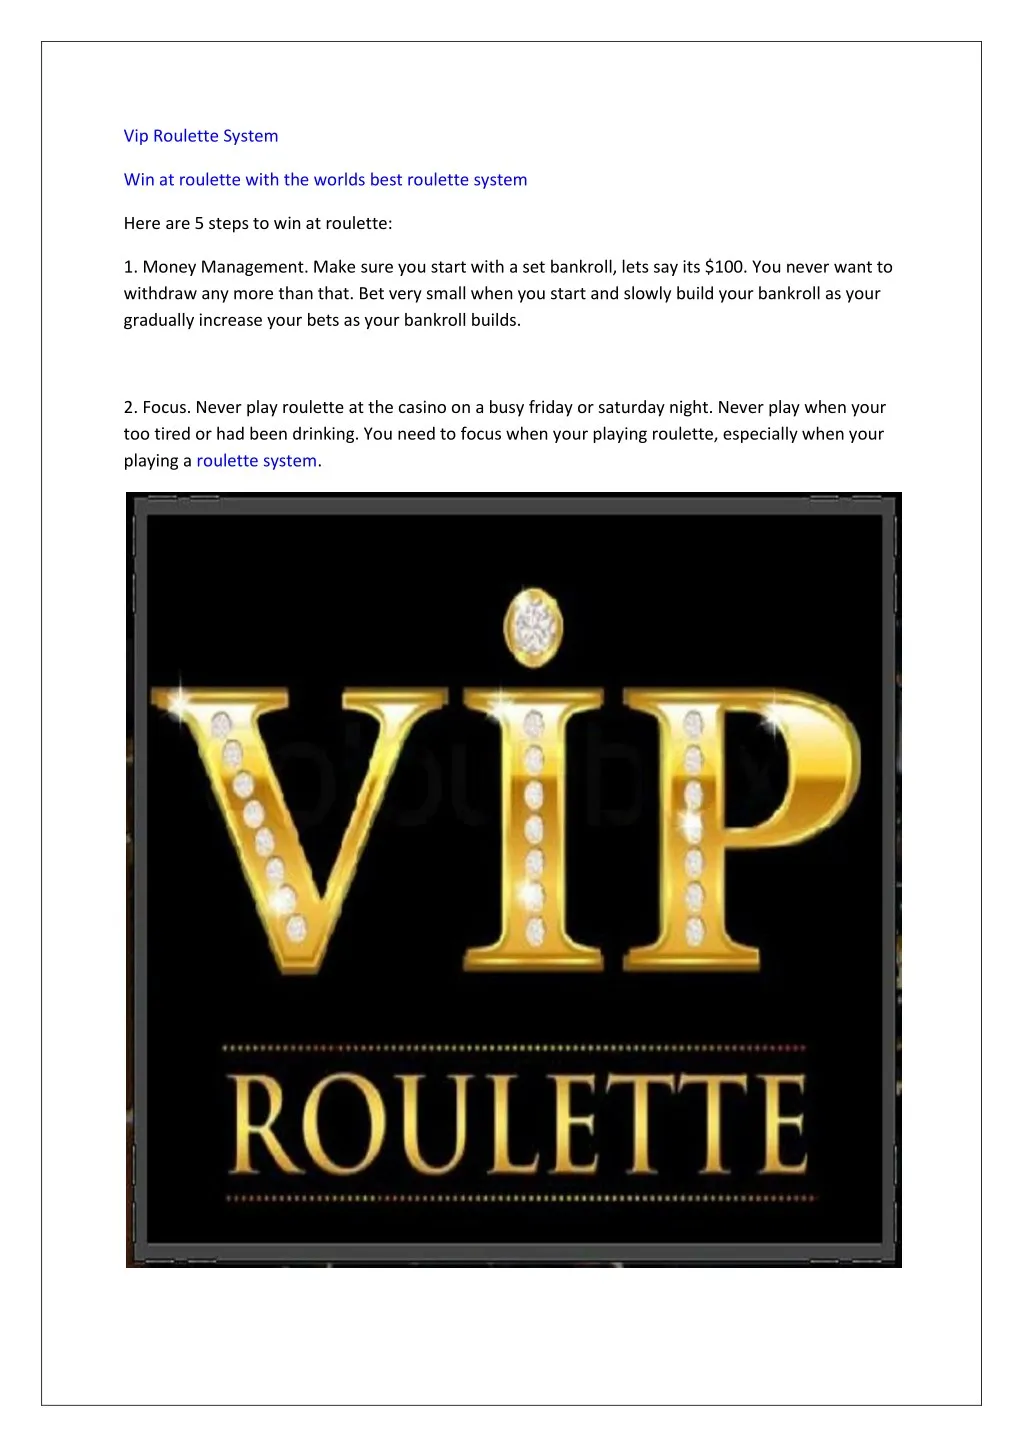 vip roulette system